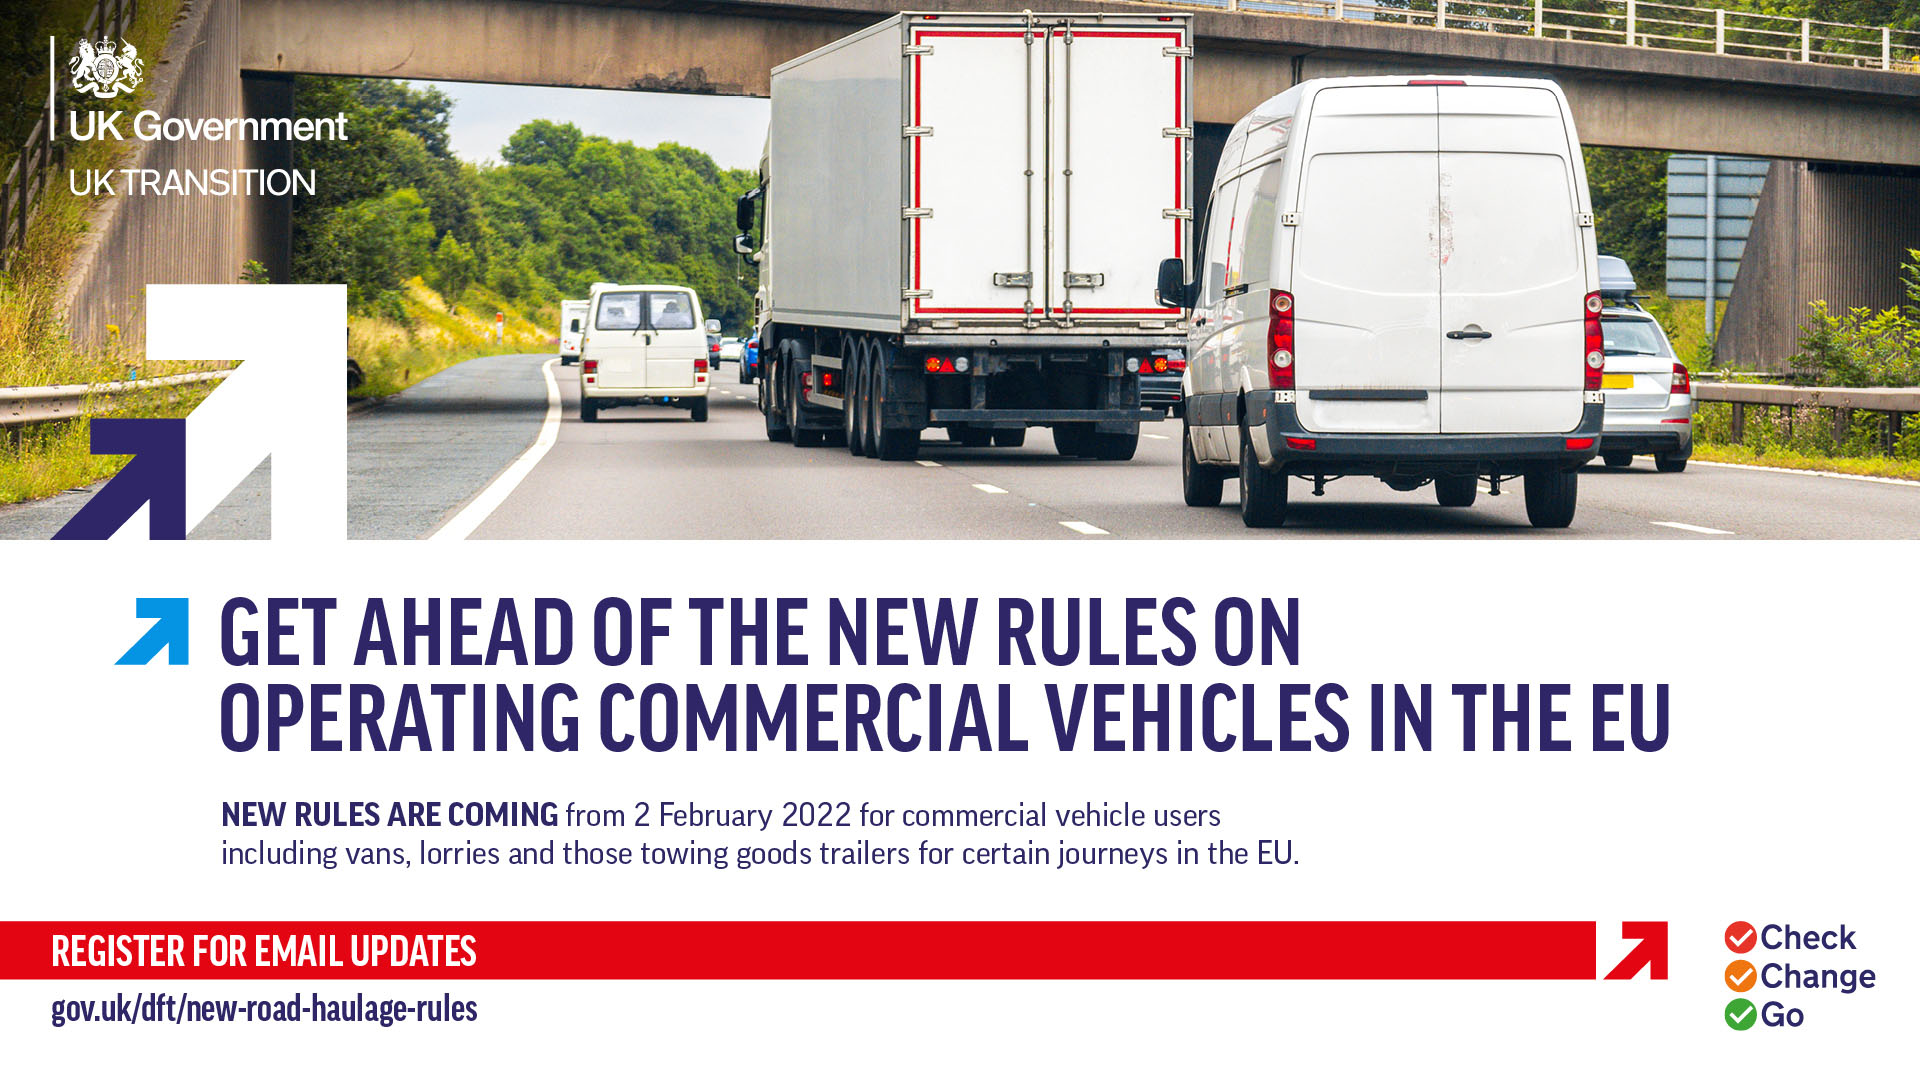 Keeping commercial vehicles moving. Get ahead of new rules for operating in the EU.